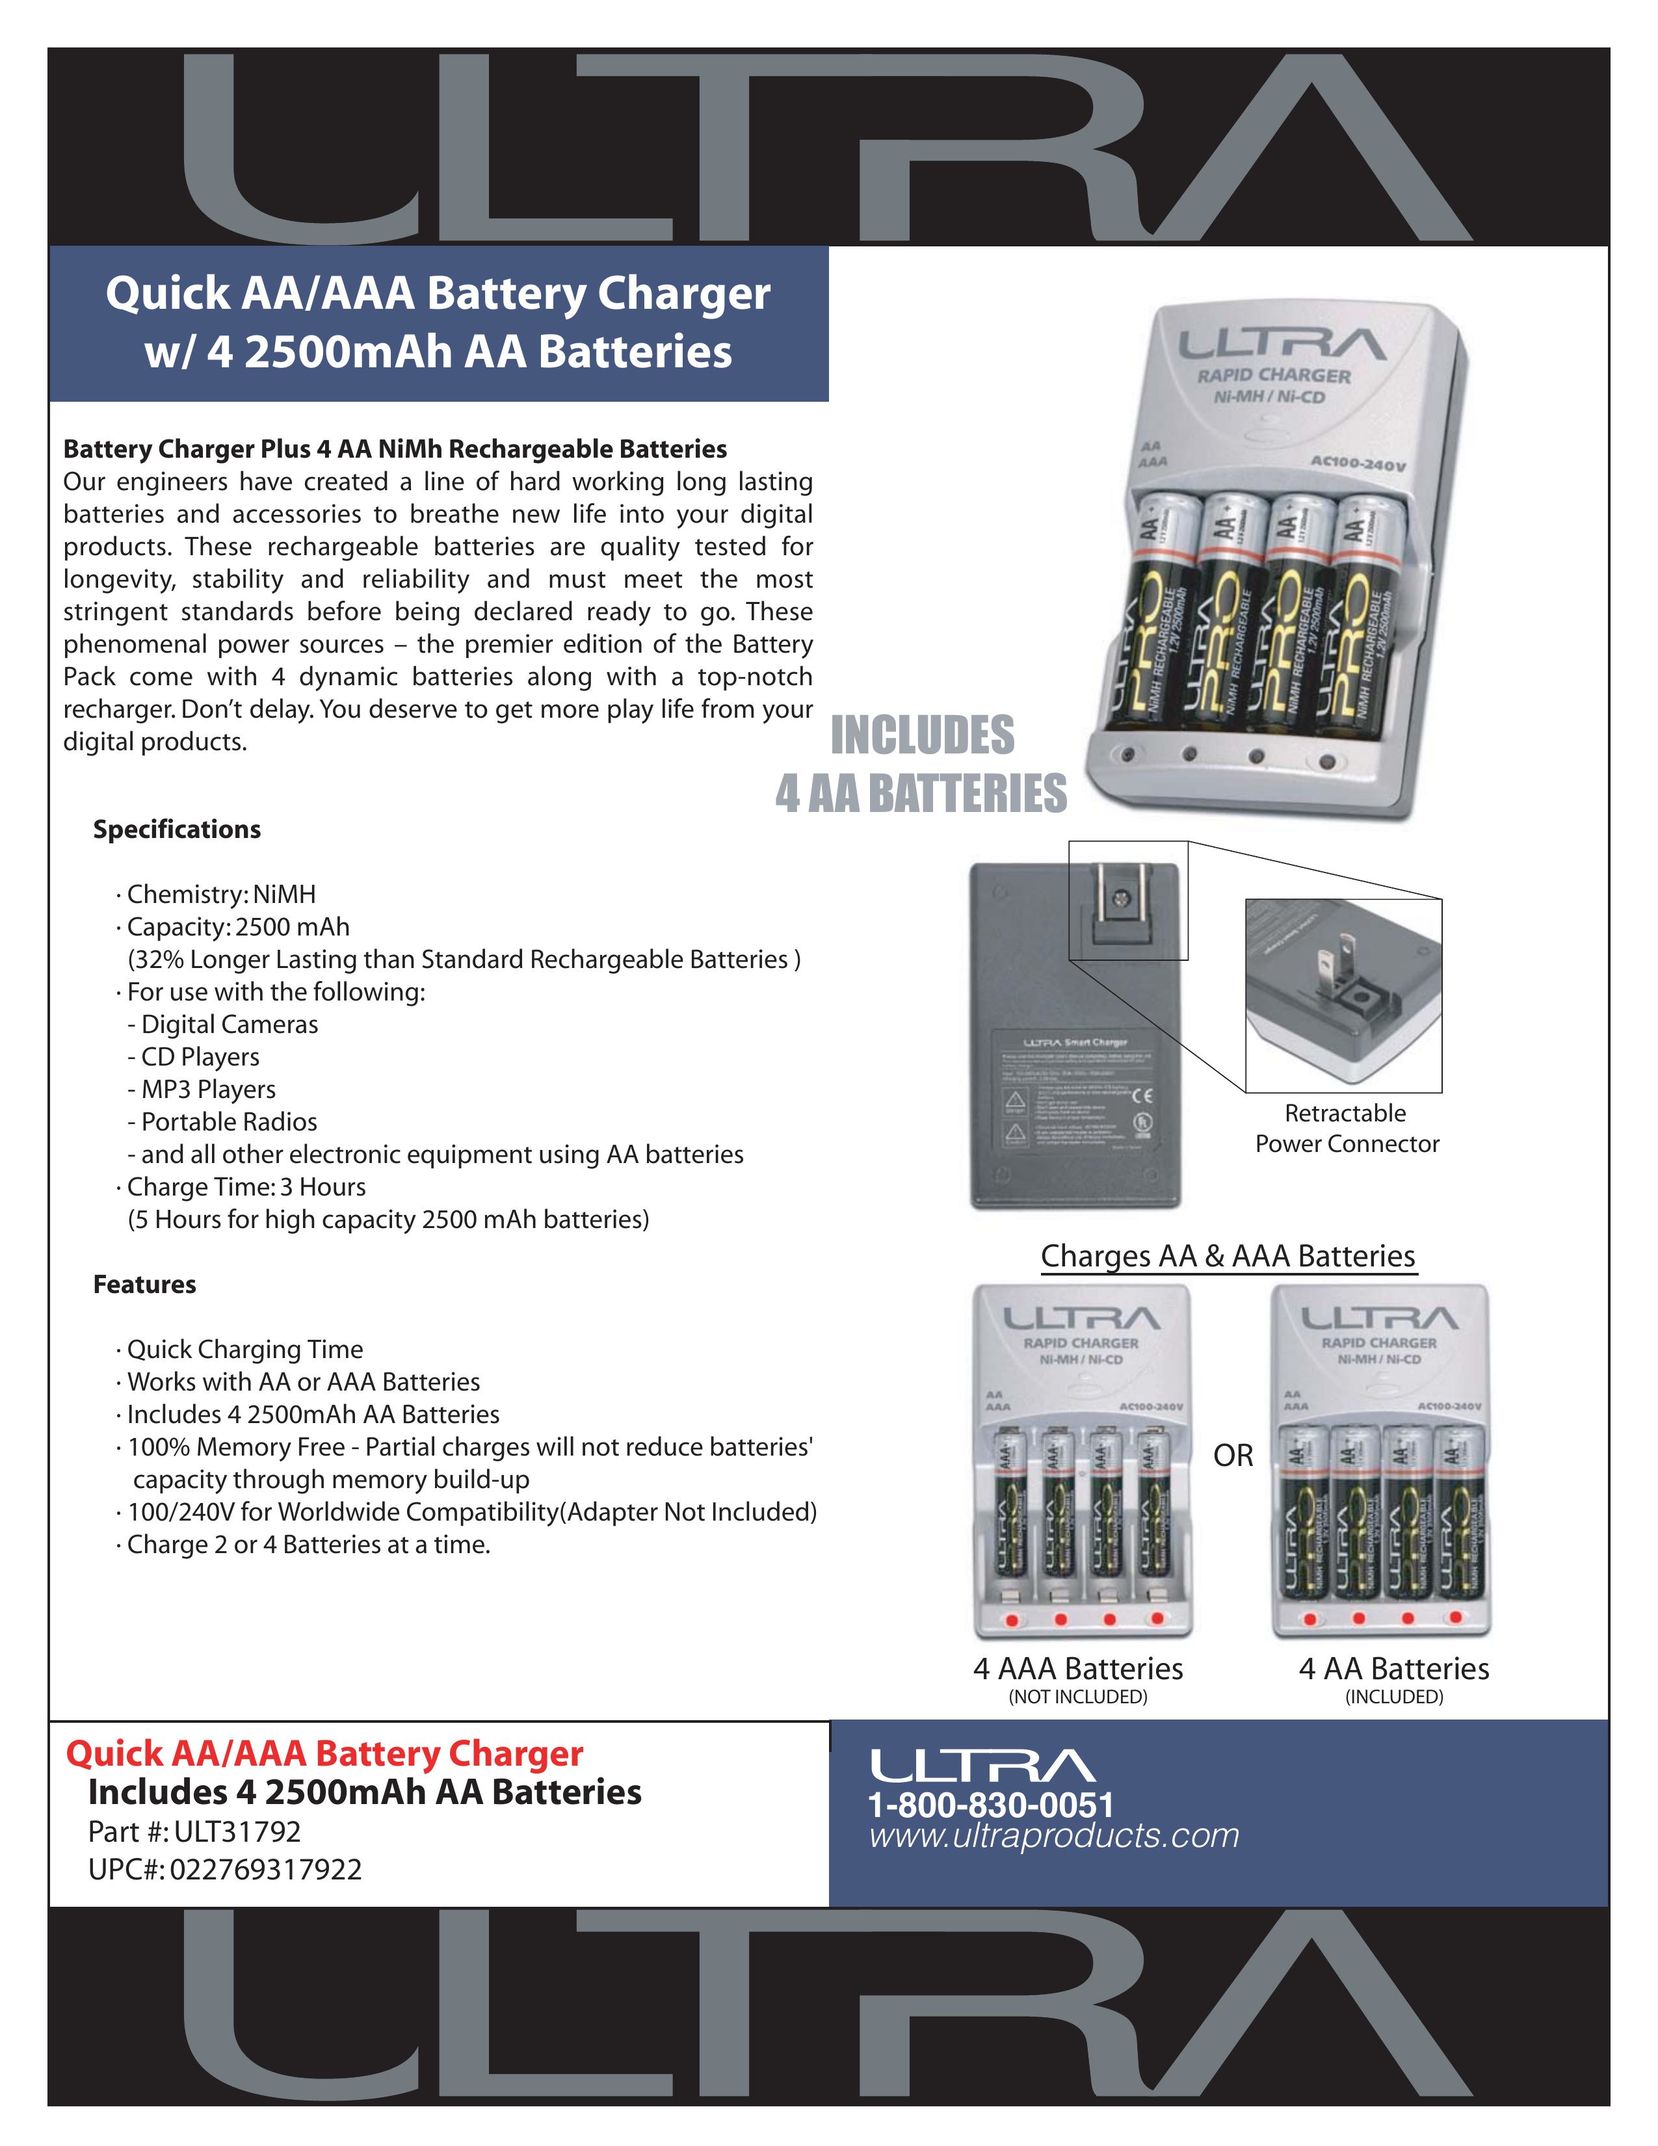 Ultra Products ULT31792 Battery Charger User Manual